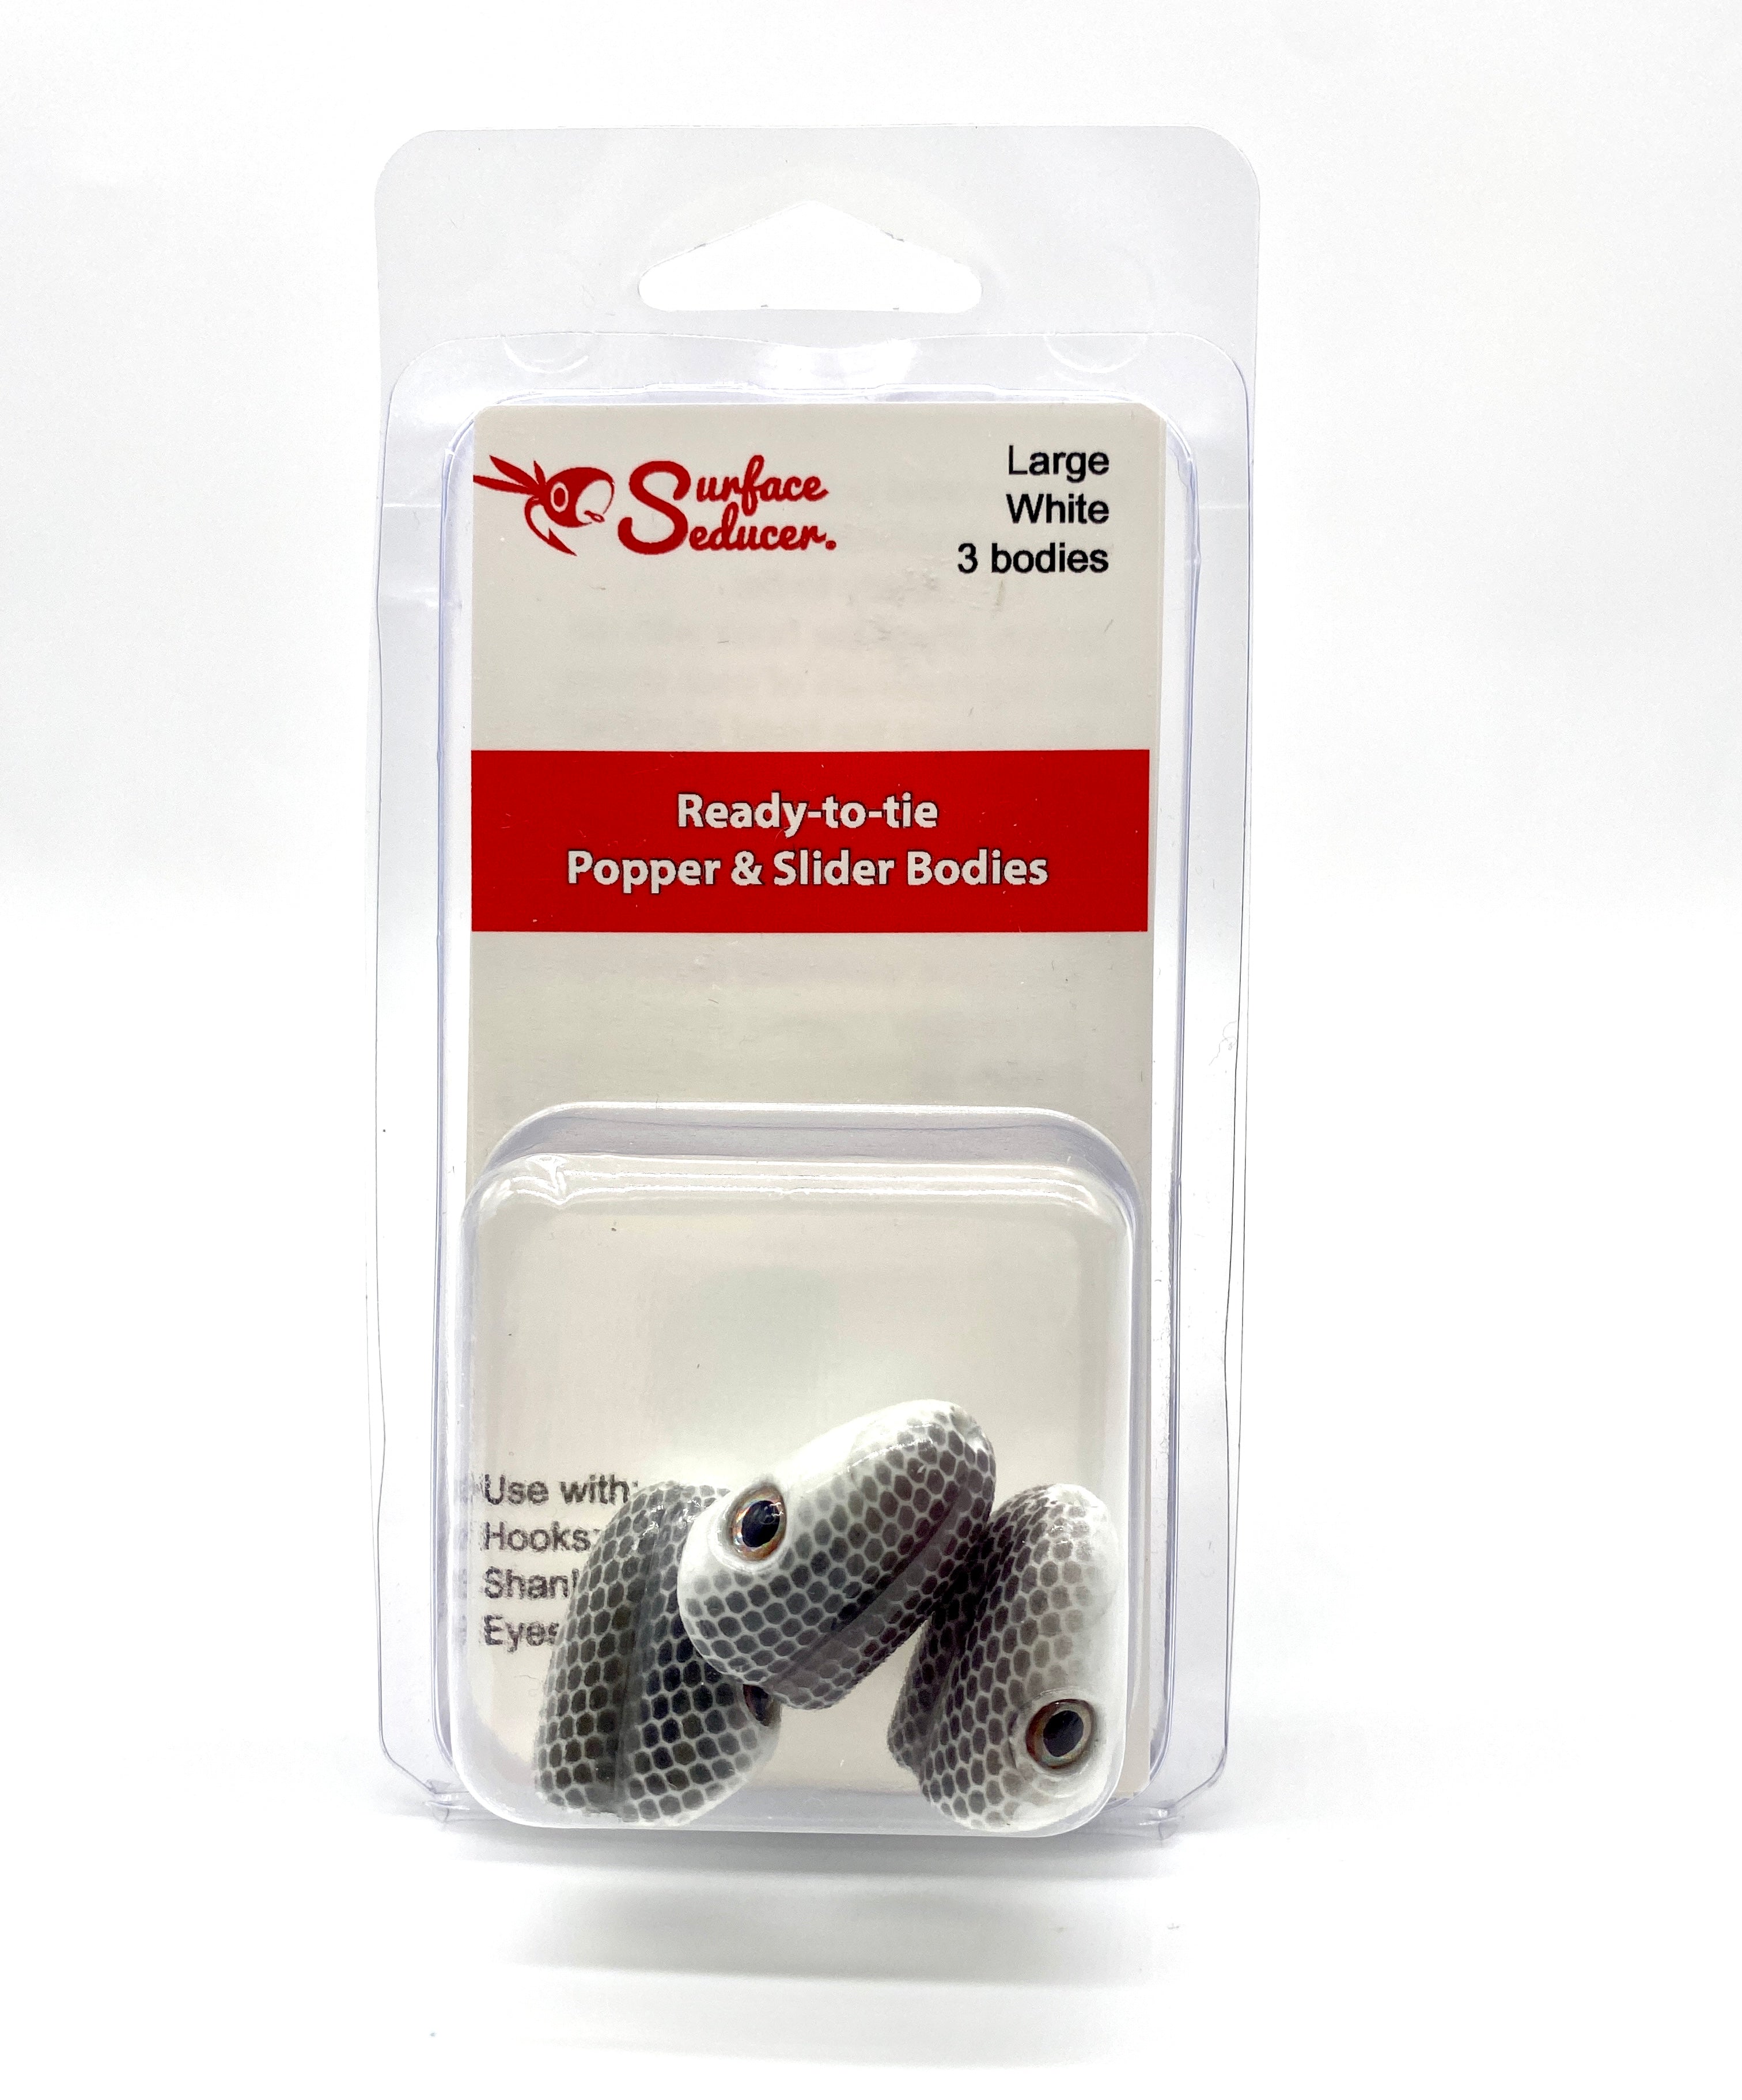 Surface Seducer® READY-TO-TIE popper bodies - Flymen Fishing Company